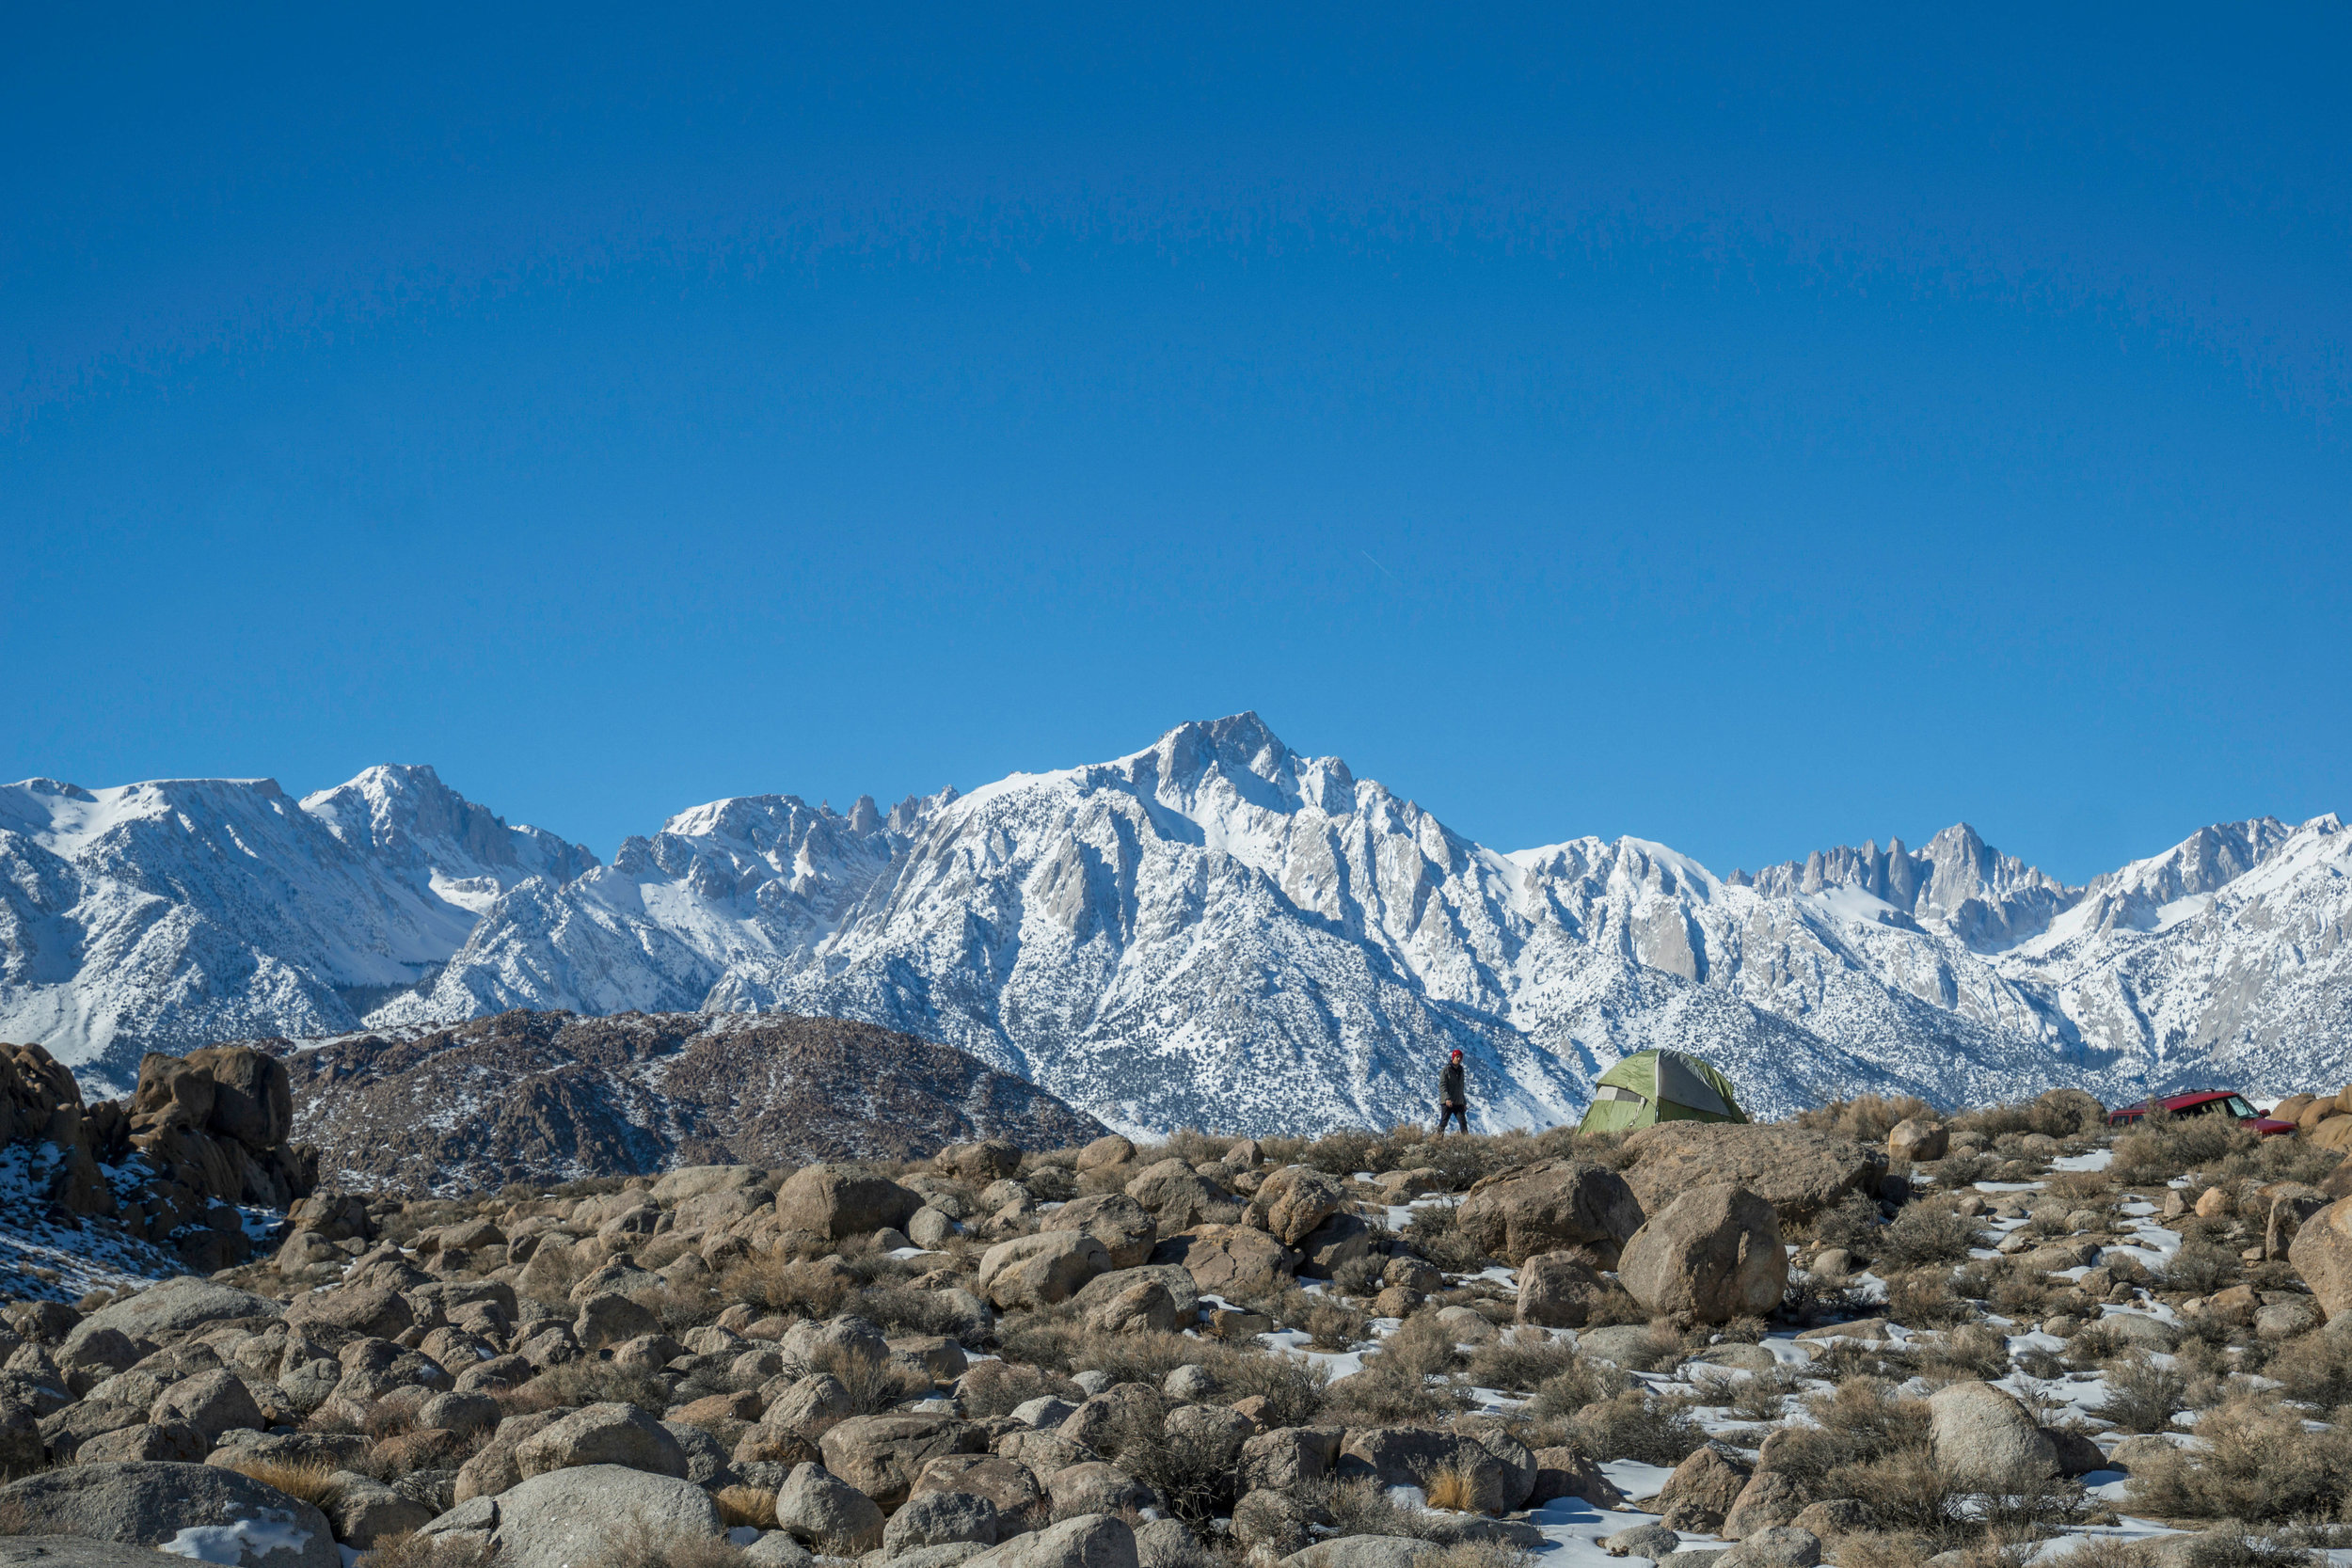 Once the sun rises we see how truly prime our locale is under the shadow of Mt. Whitney. Sometimes the best sites are found under the oddest of circumstances.